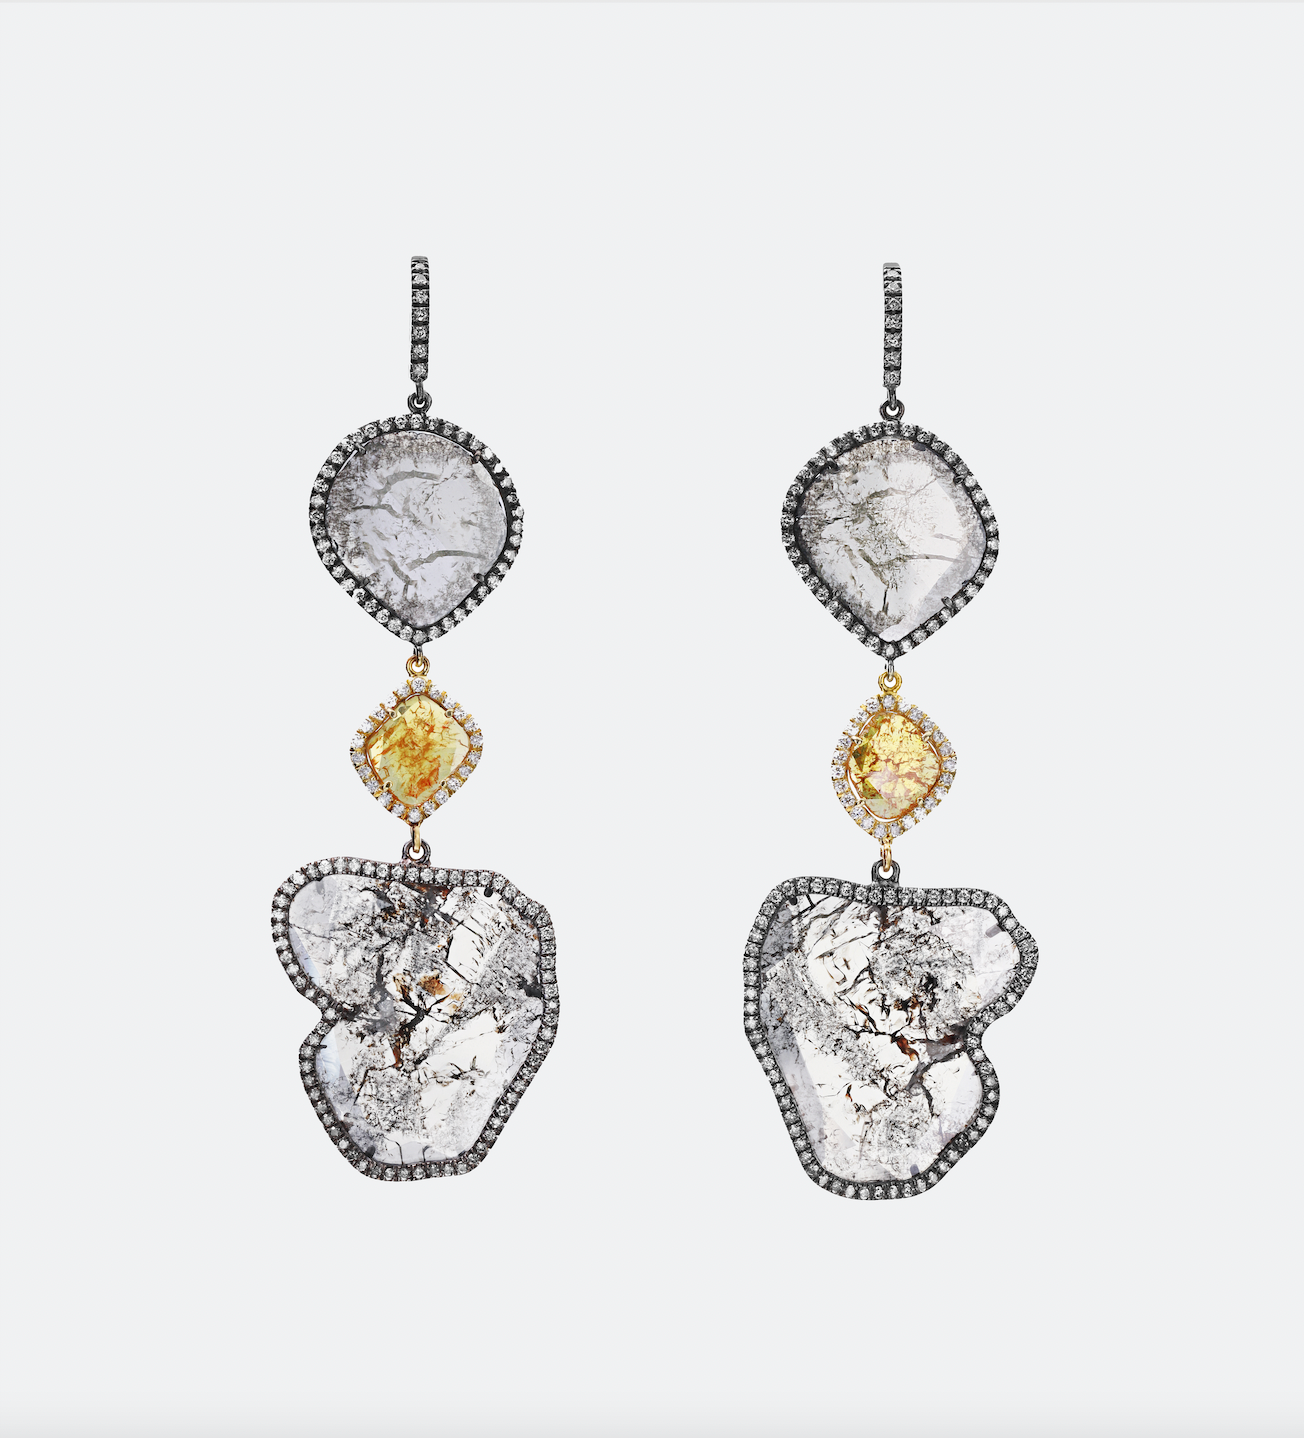 18K Yellow Gold Three Tier Grey Slice and Yellow Slice Earrings with Pavé Diamonds